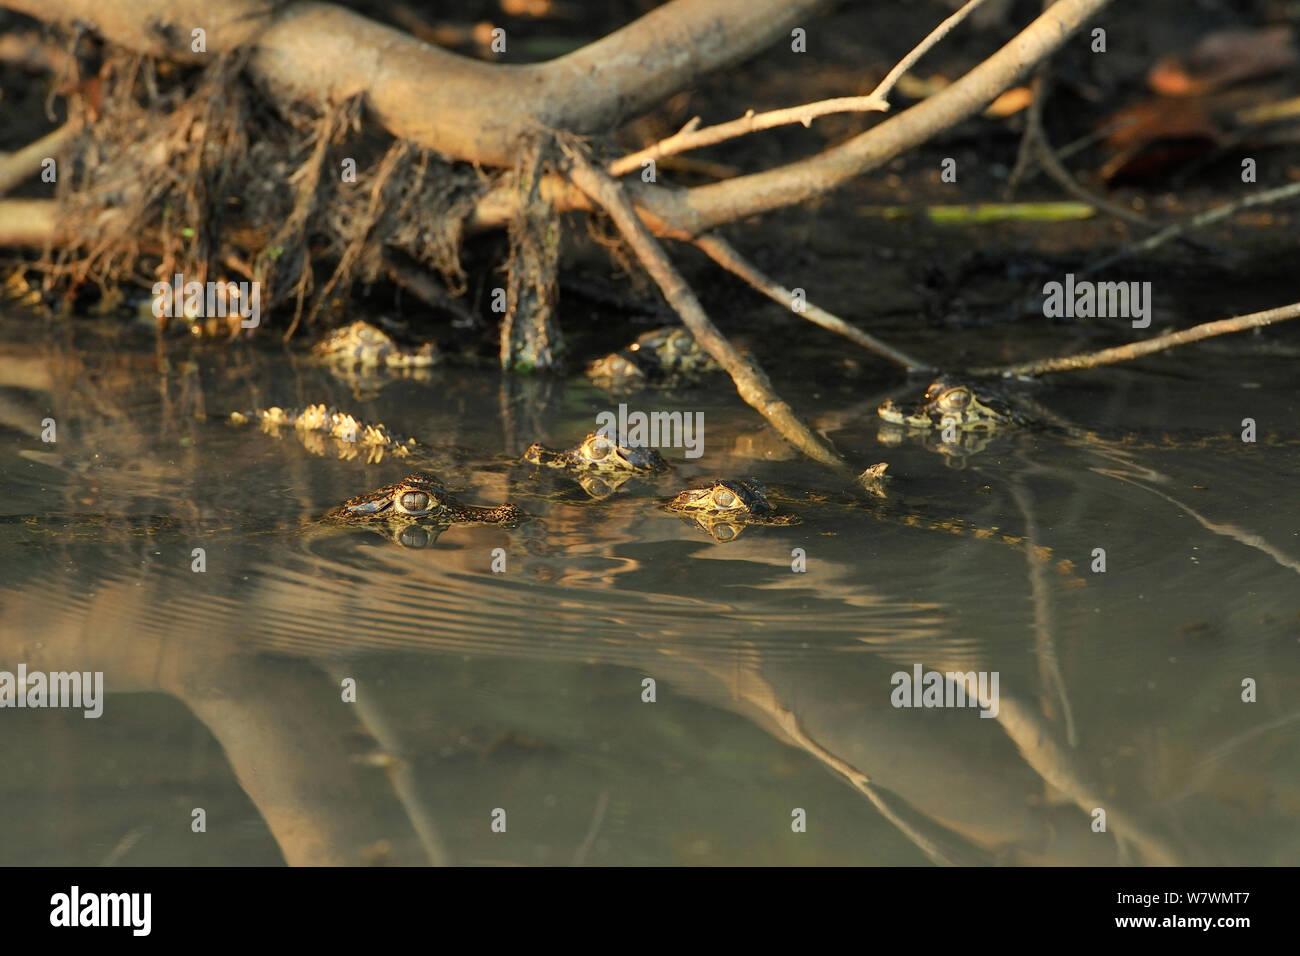 Baby Spectacled Caimans (Caiman crocodilus)  hiding in roots of trees, in Piquiri River, Pantanal of Mato Grosso, Mato Grosso State, Western Brazil. Stock Photo